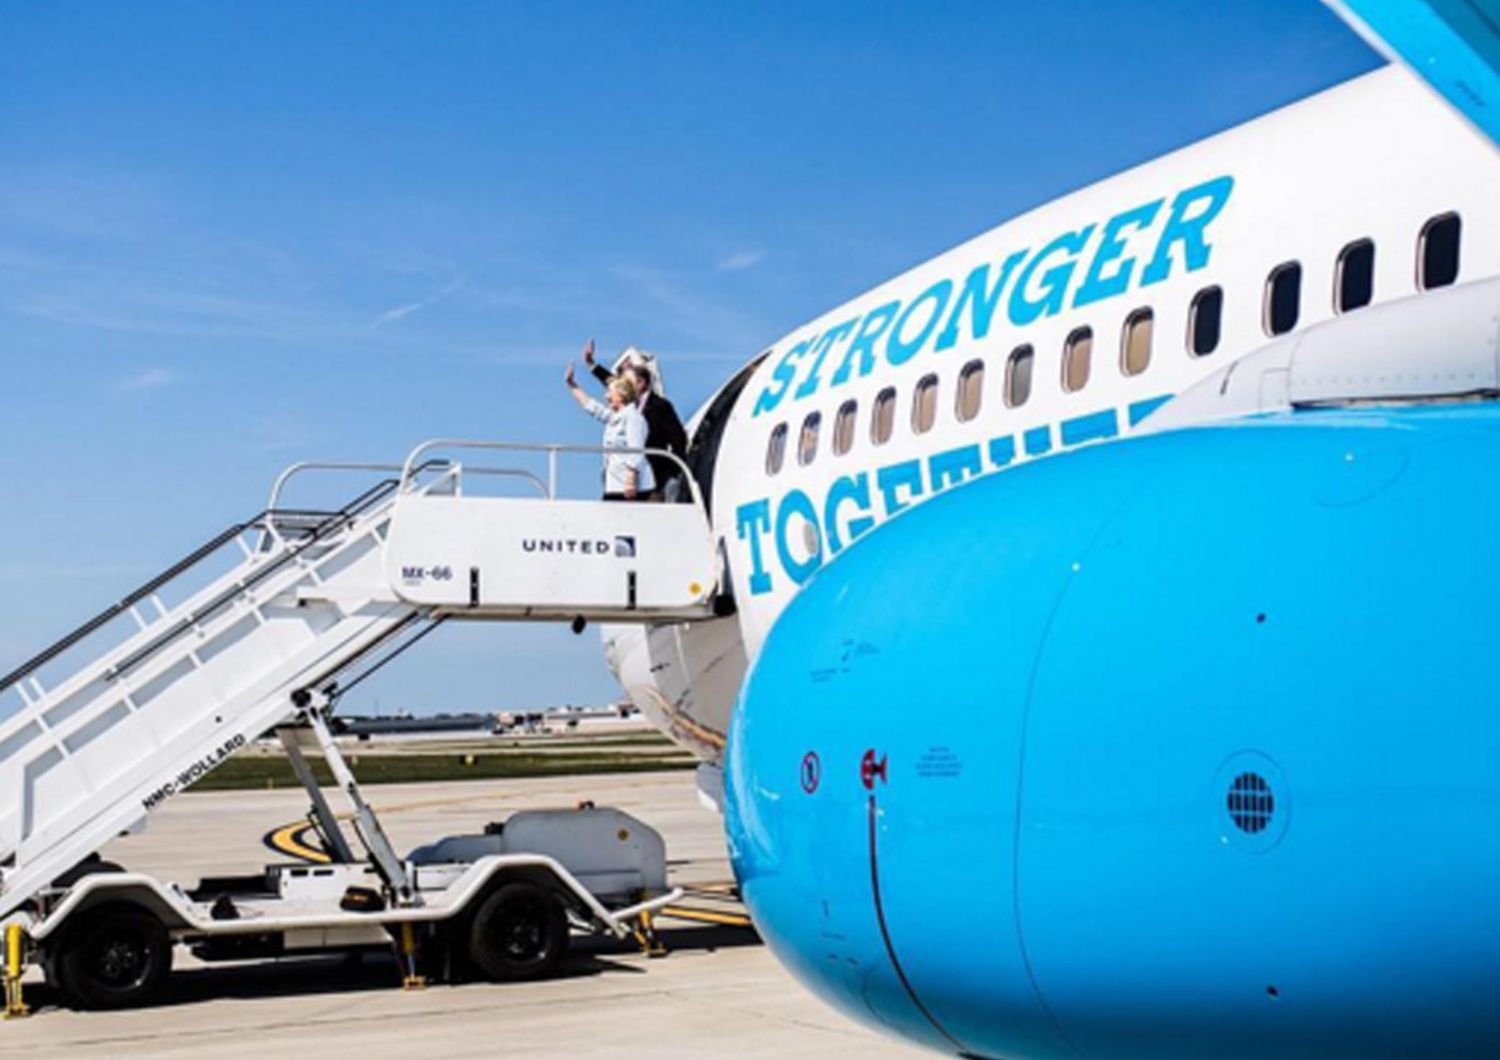 Hillary clinton boeing 575 stronger togher